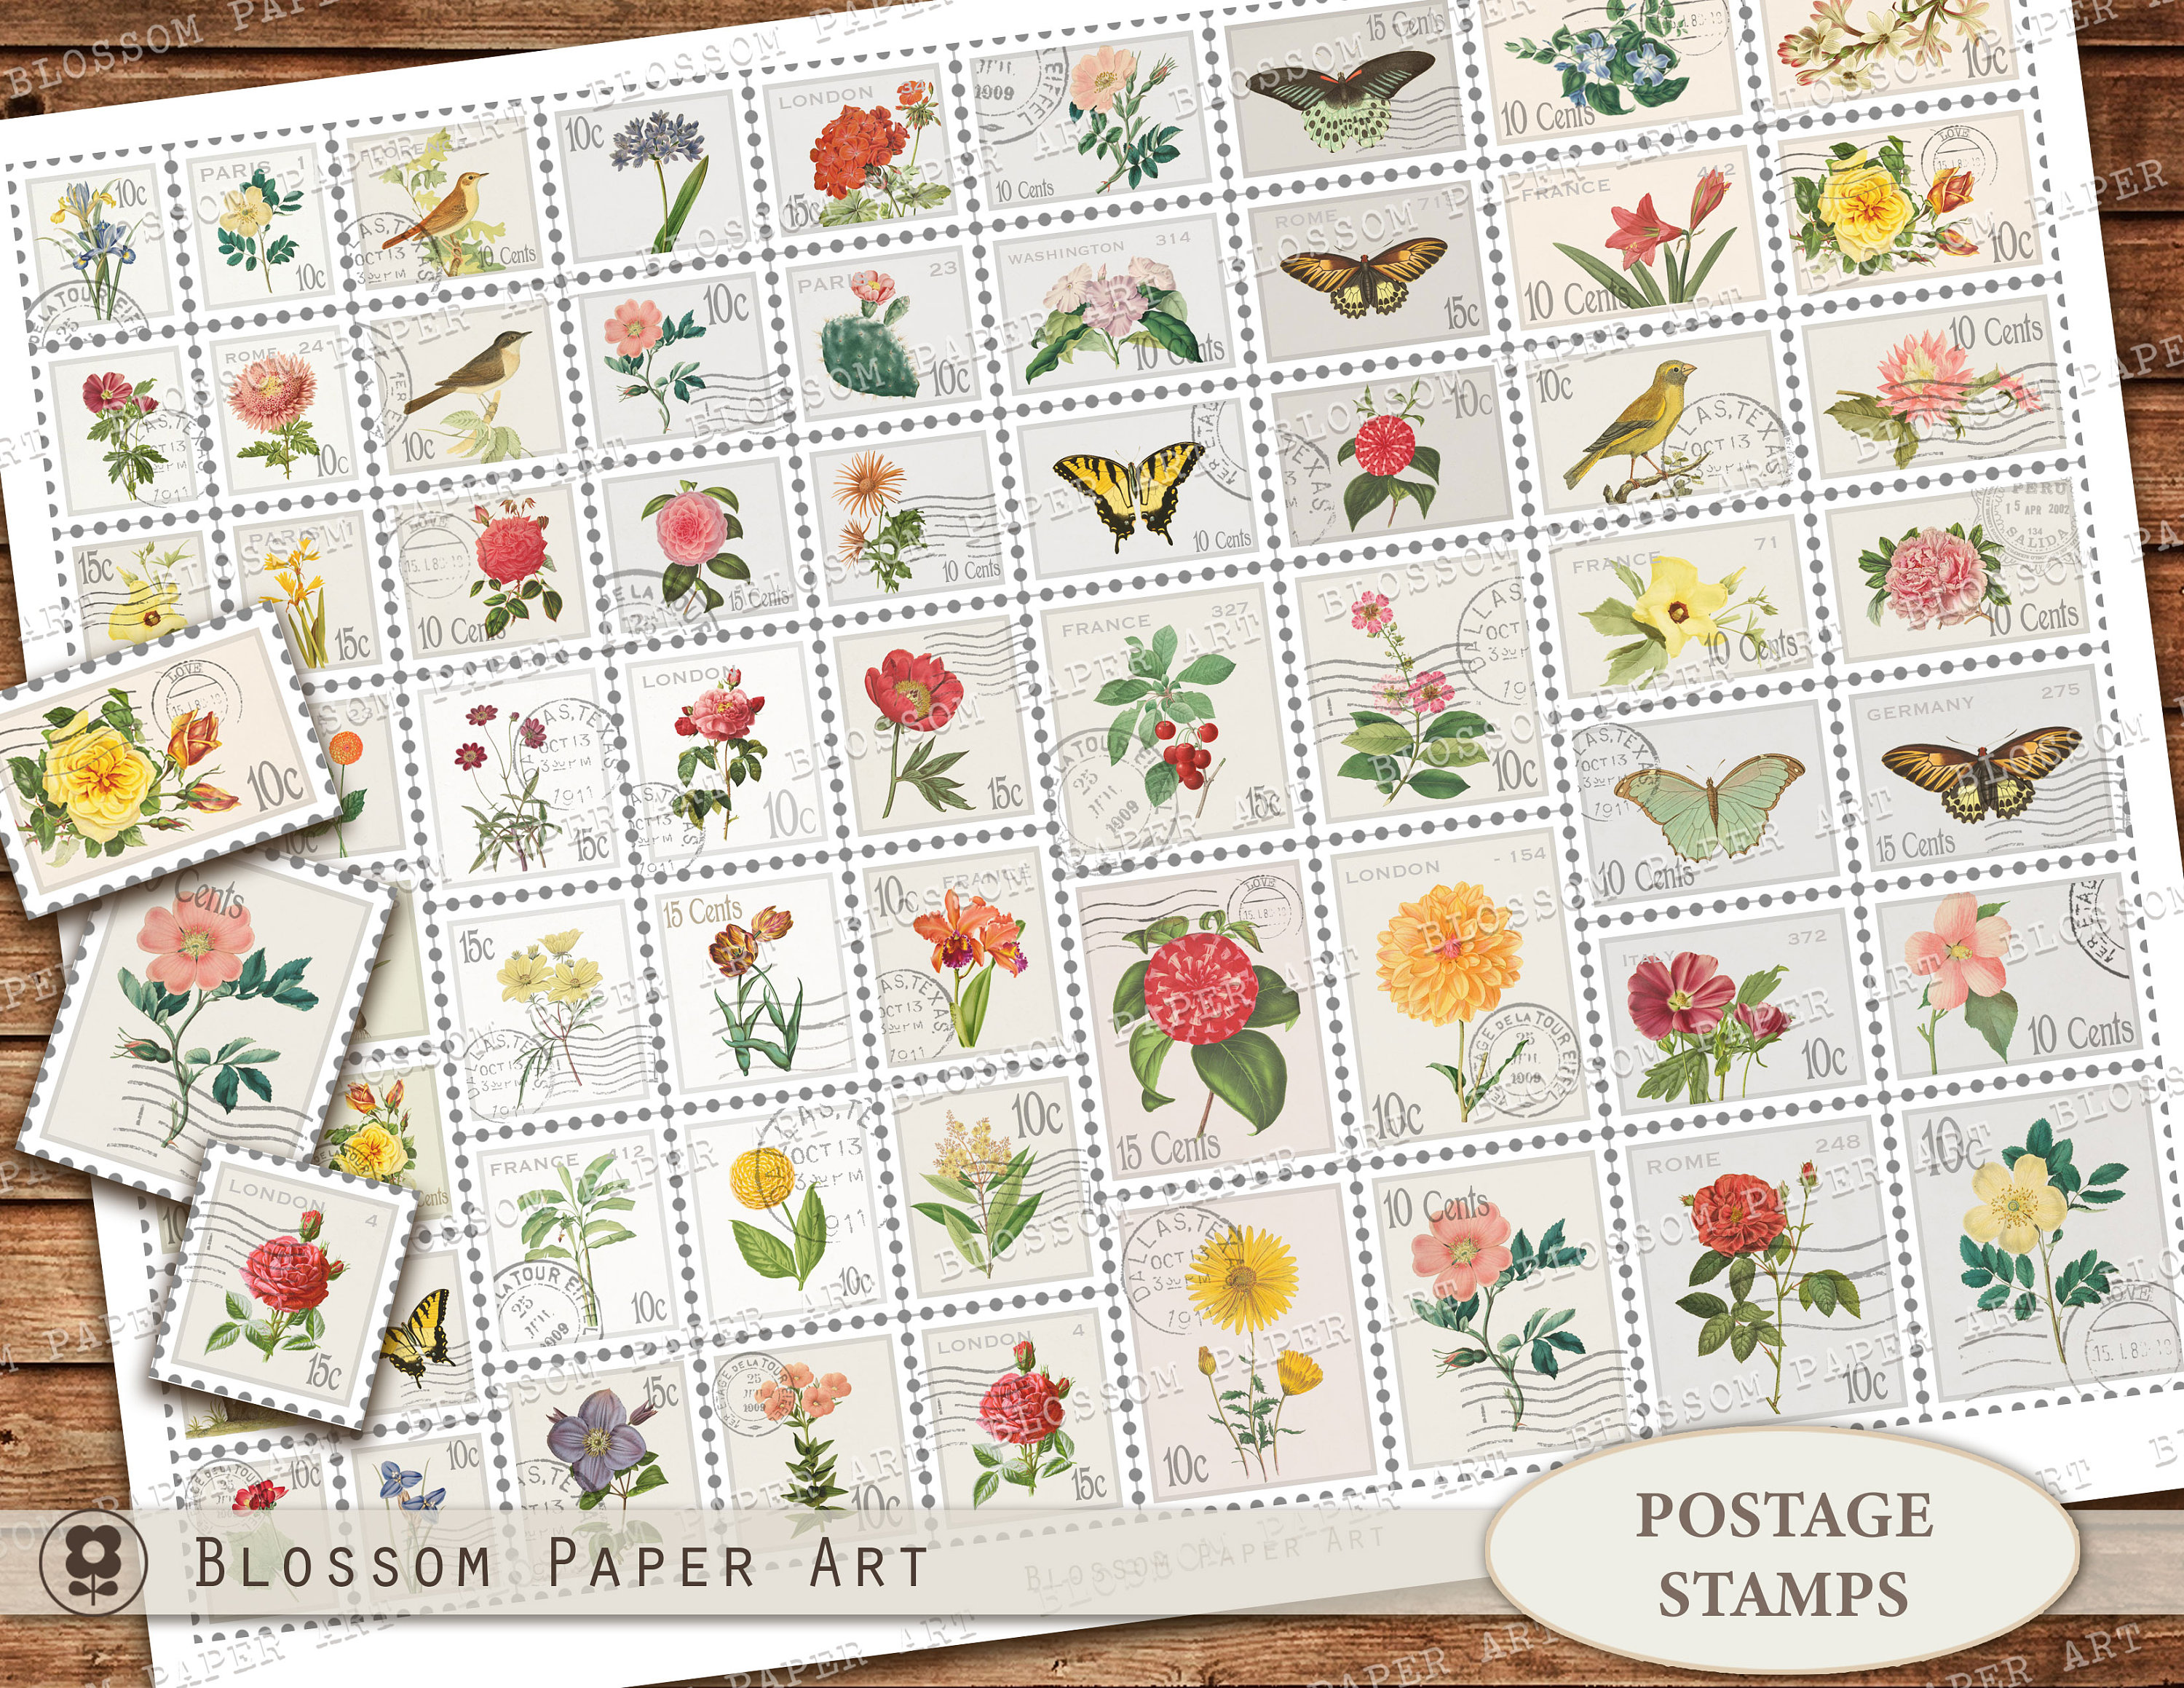 Floral Stickers Vintage Faux Stamps Graphic by Summer Digital